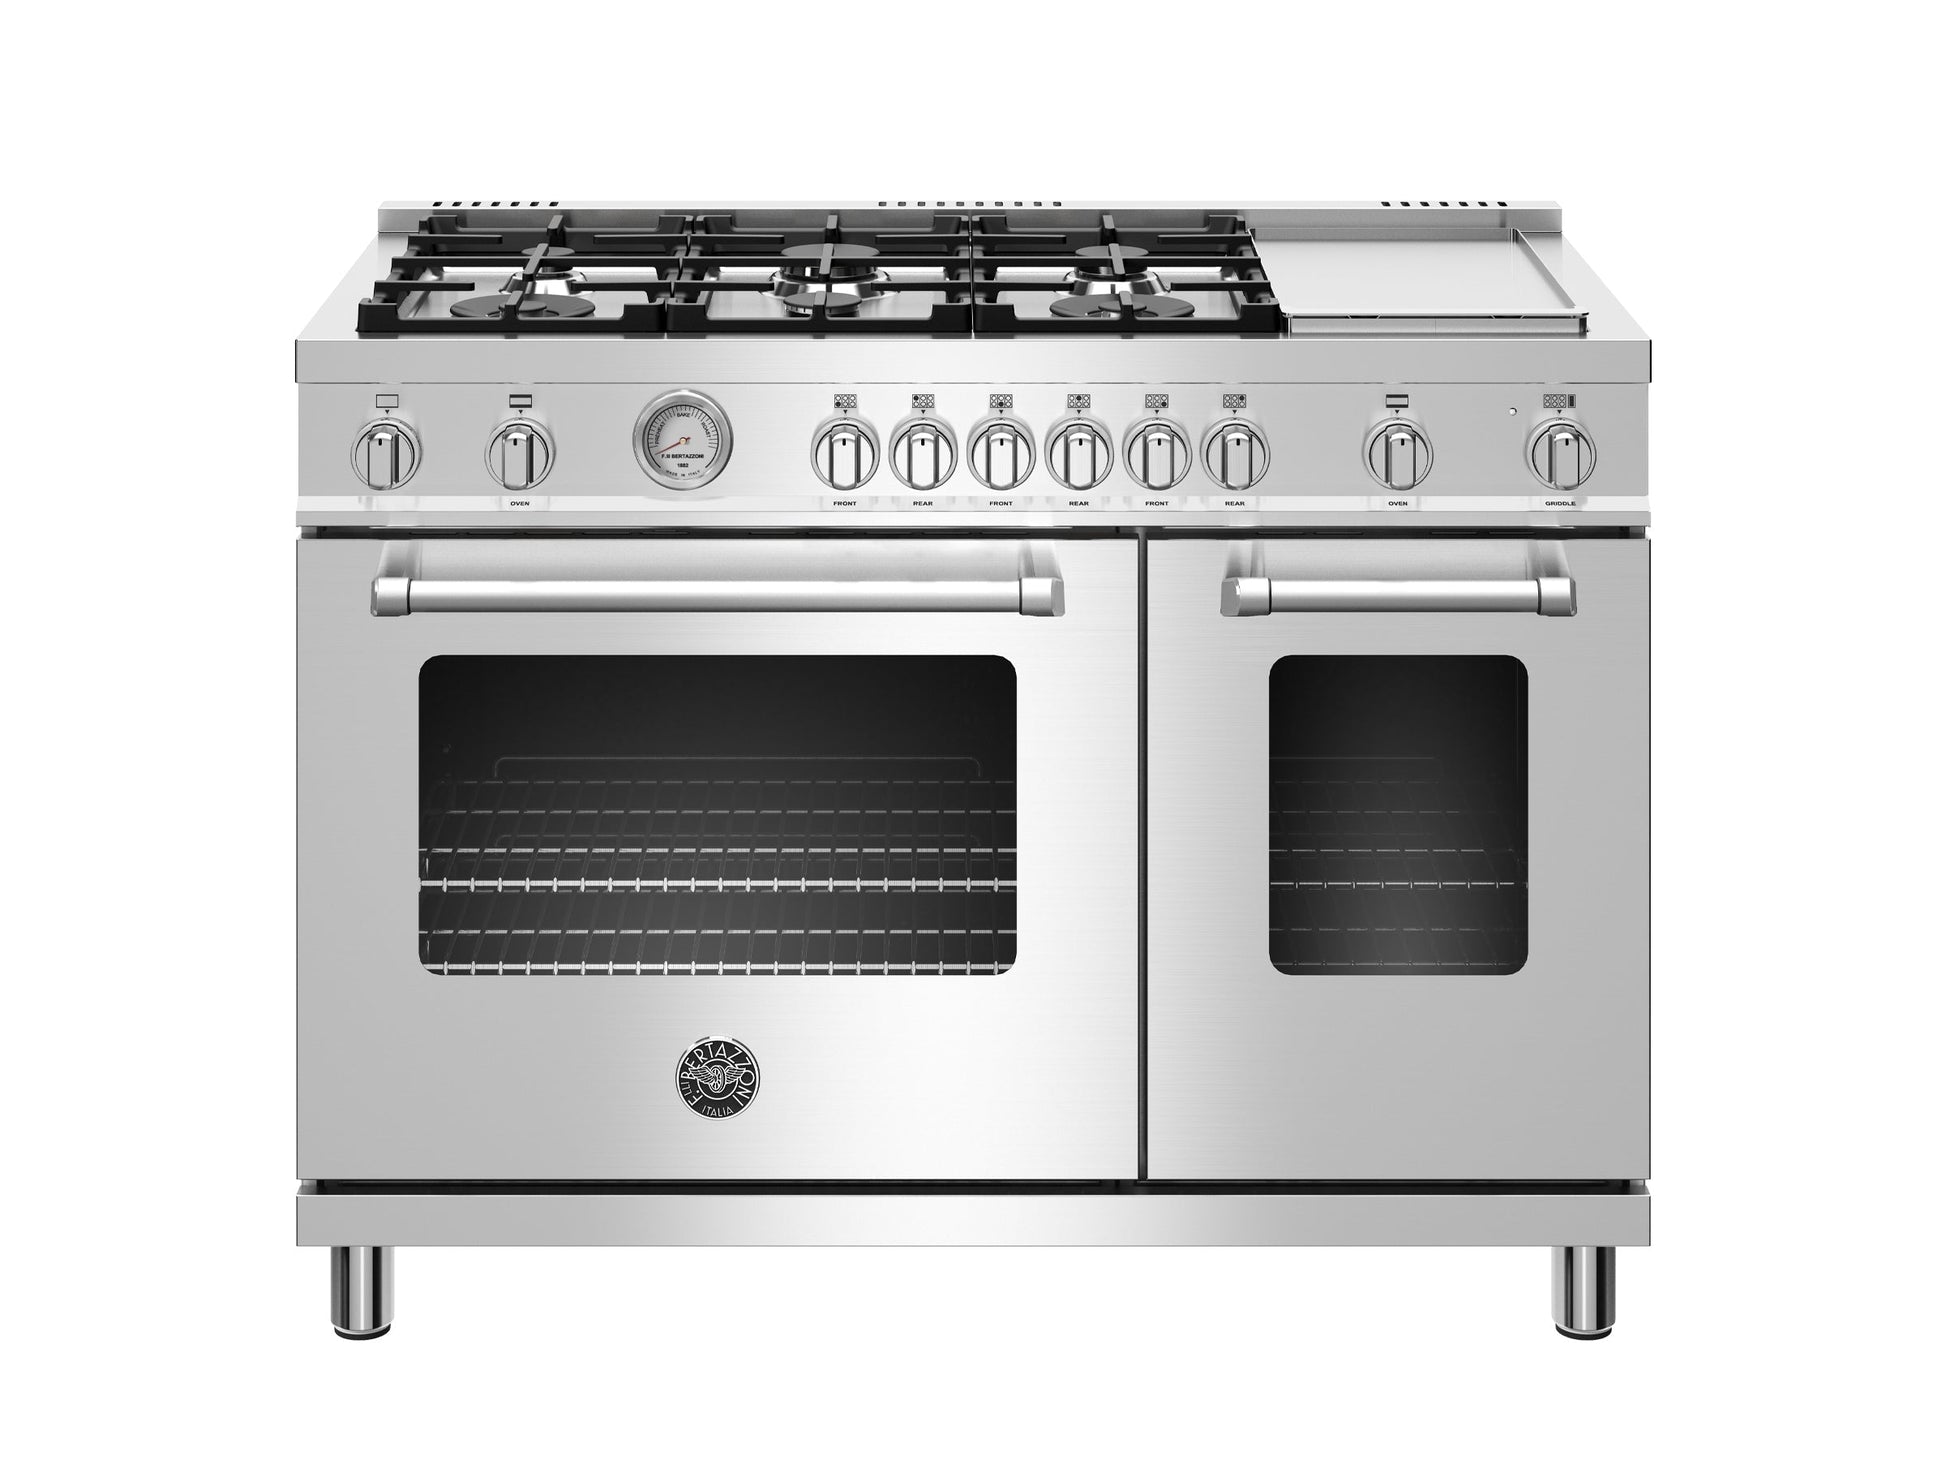 6 burner range with 24 griddle and double oven